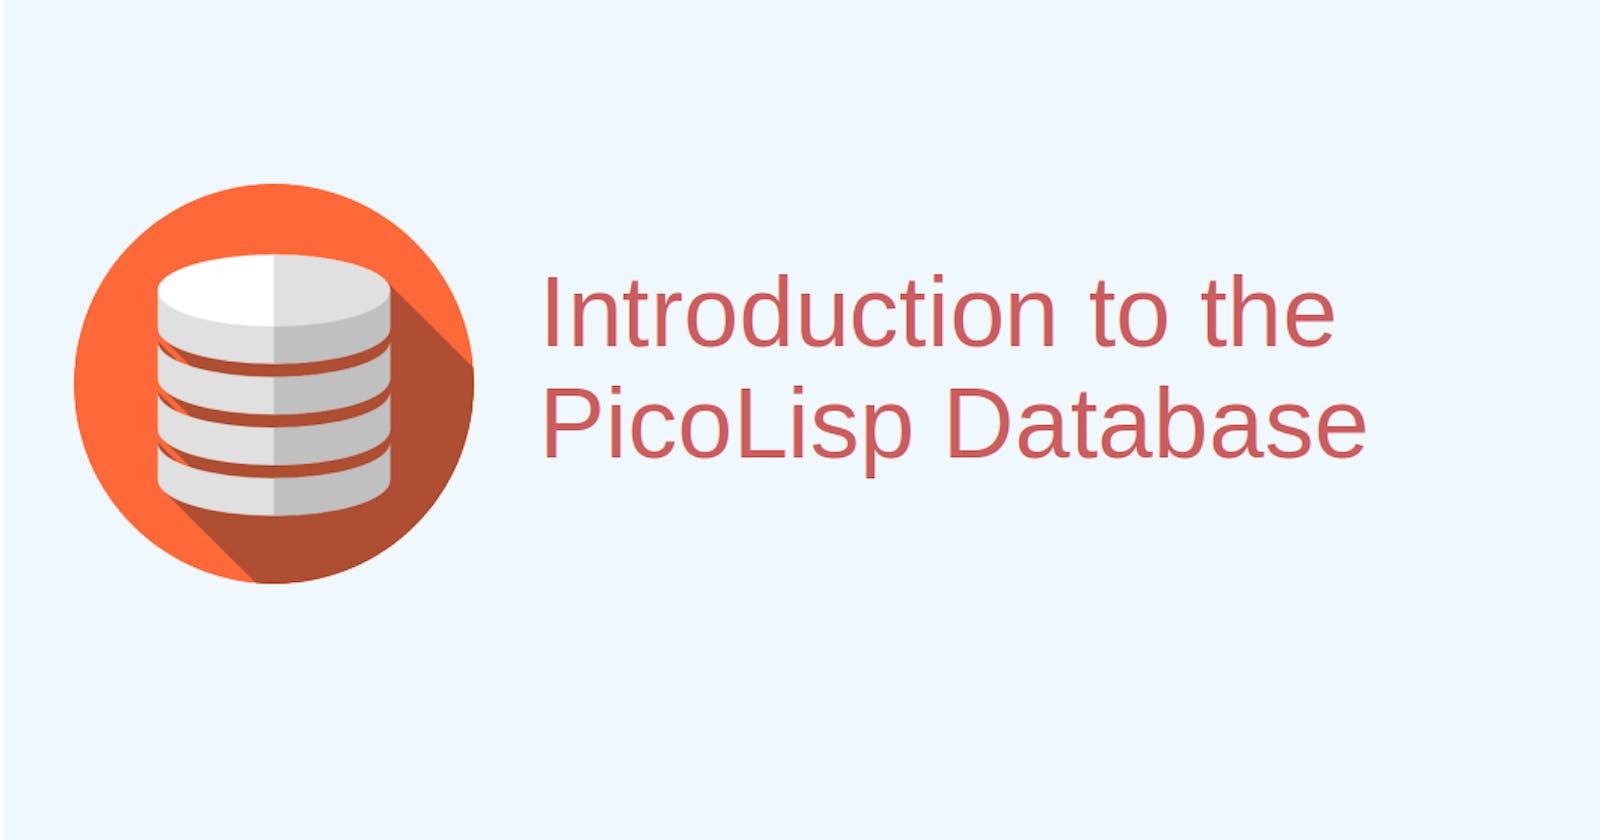 Introduction to the PicoLisp Database